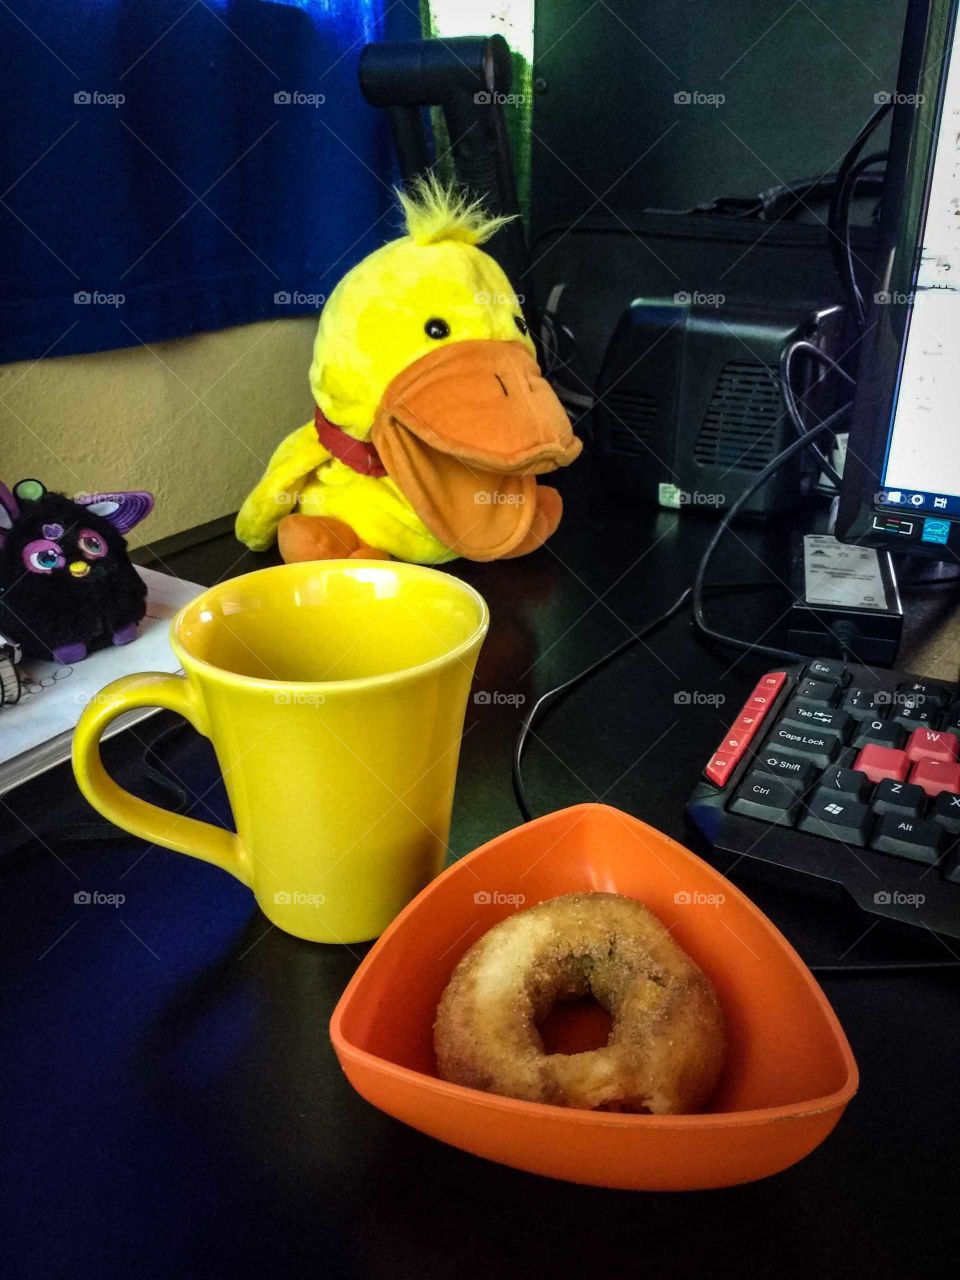 coffee with donut at work toys make up the table